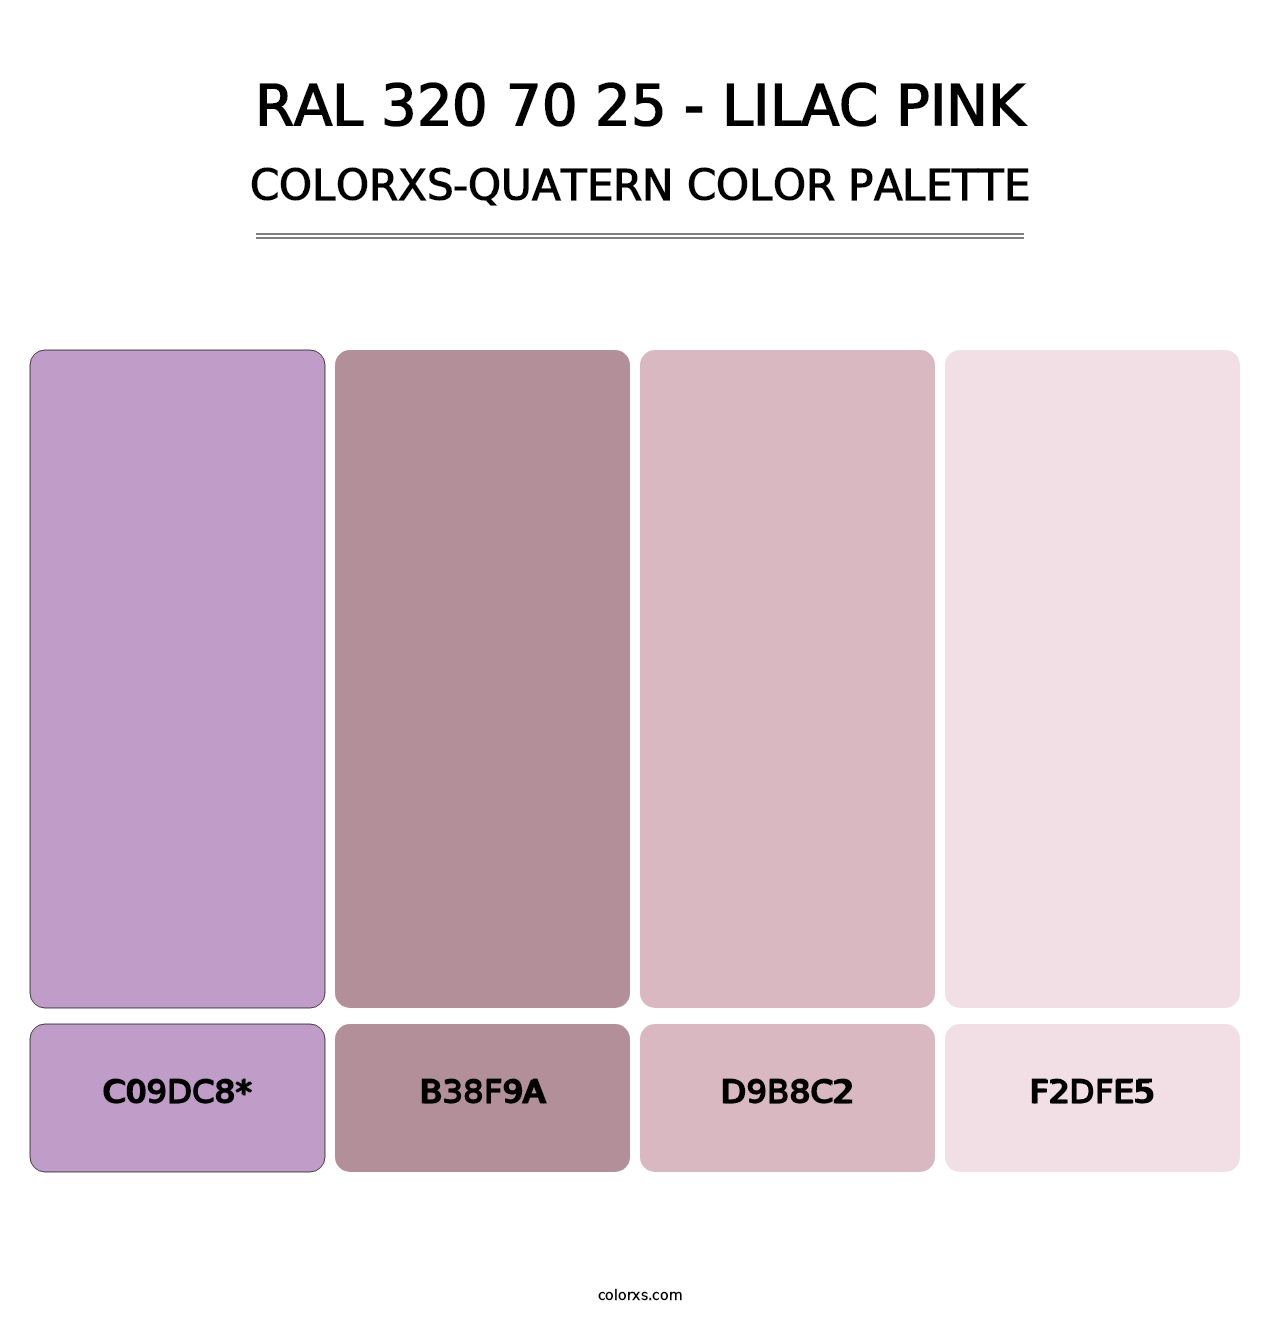 RAL 320 70 25 - Lilac Pink - Colorxs Quatern Palette